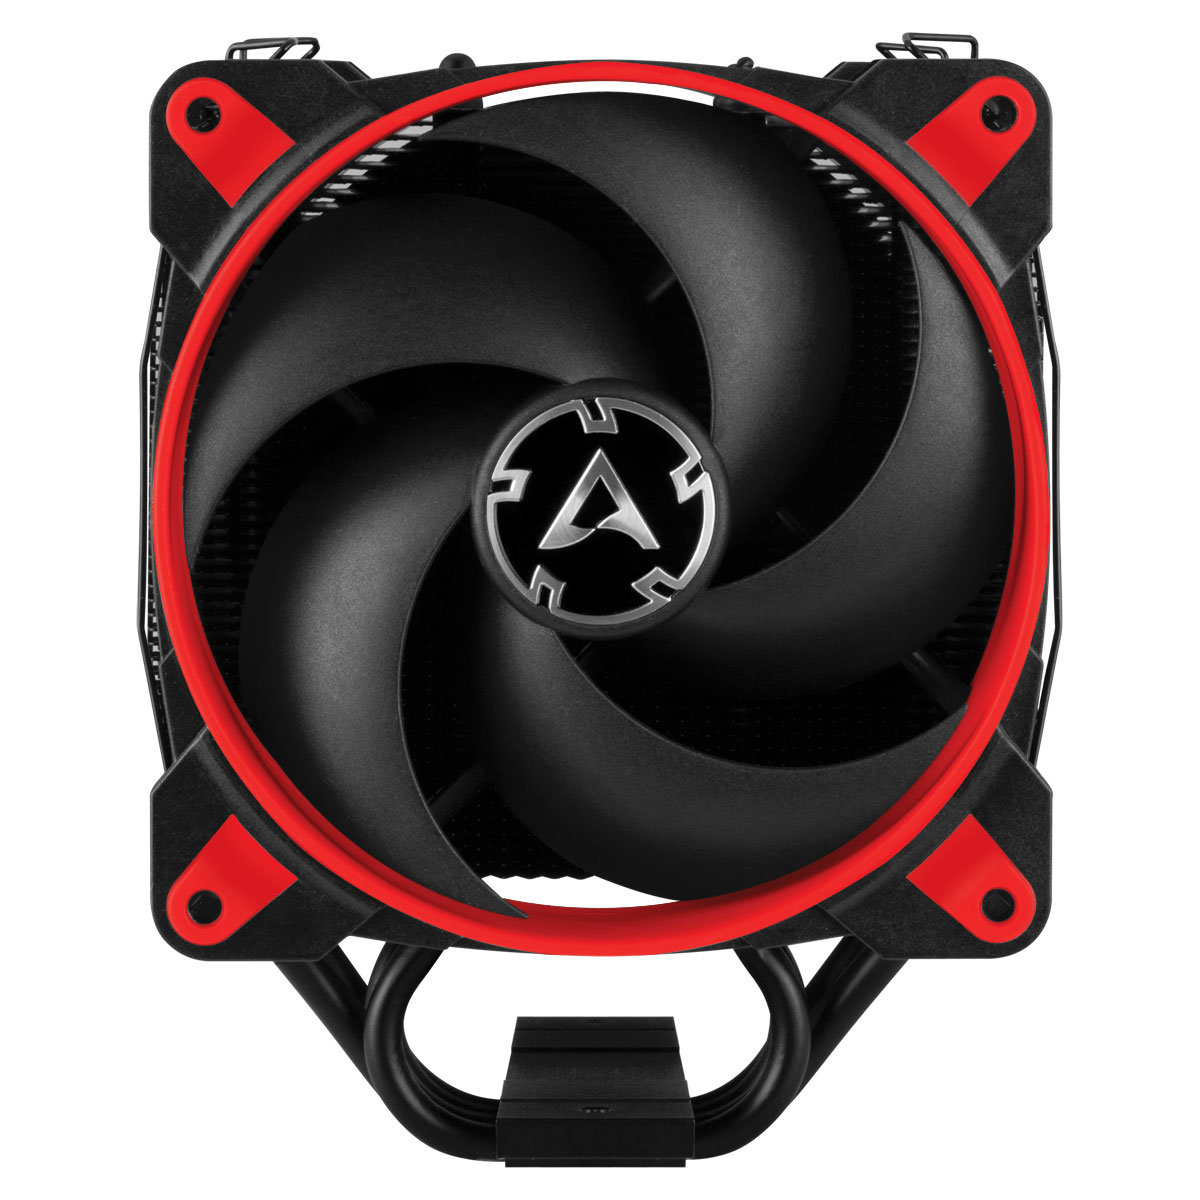 Tower CPU Cooler with Push-Pull Configuration ARCTIC Freezer 34 eSports DUO (Red) Front View